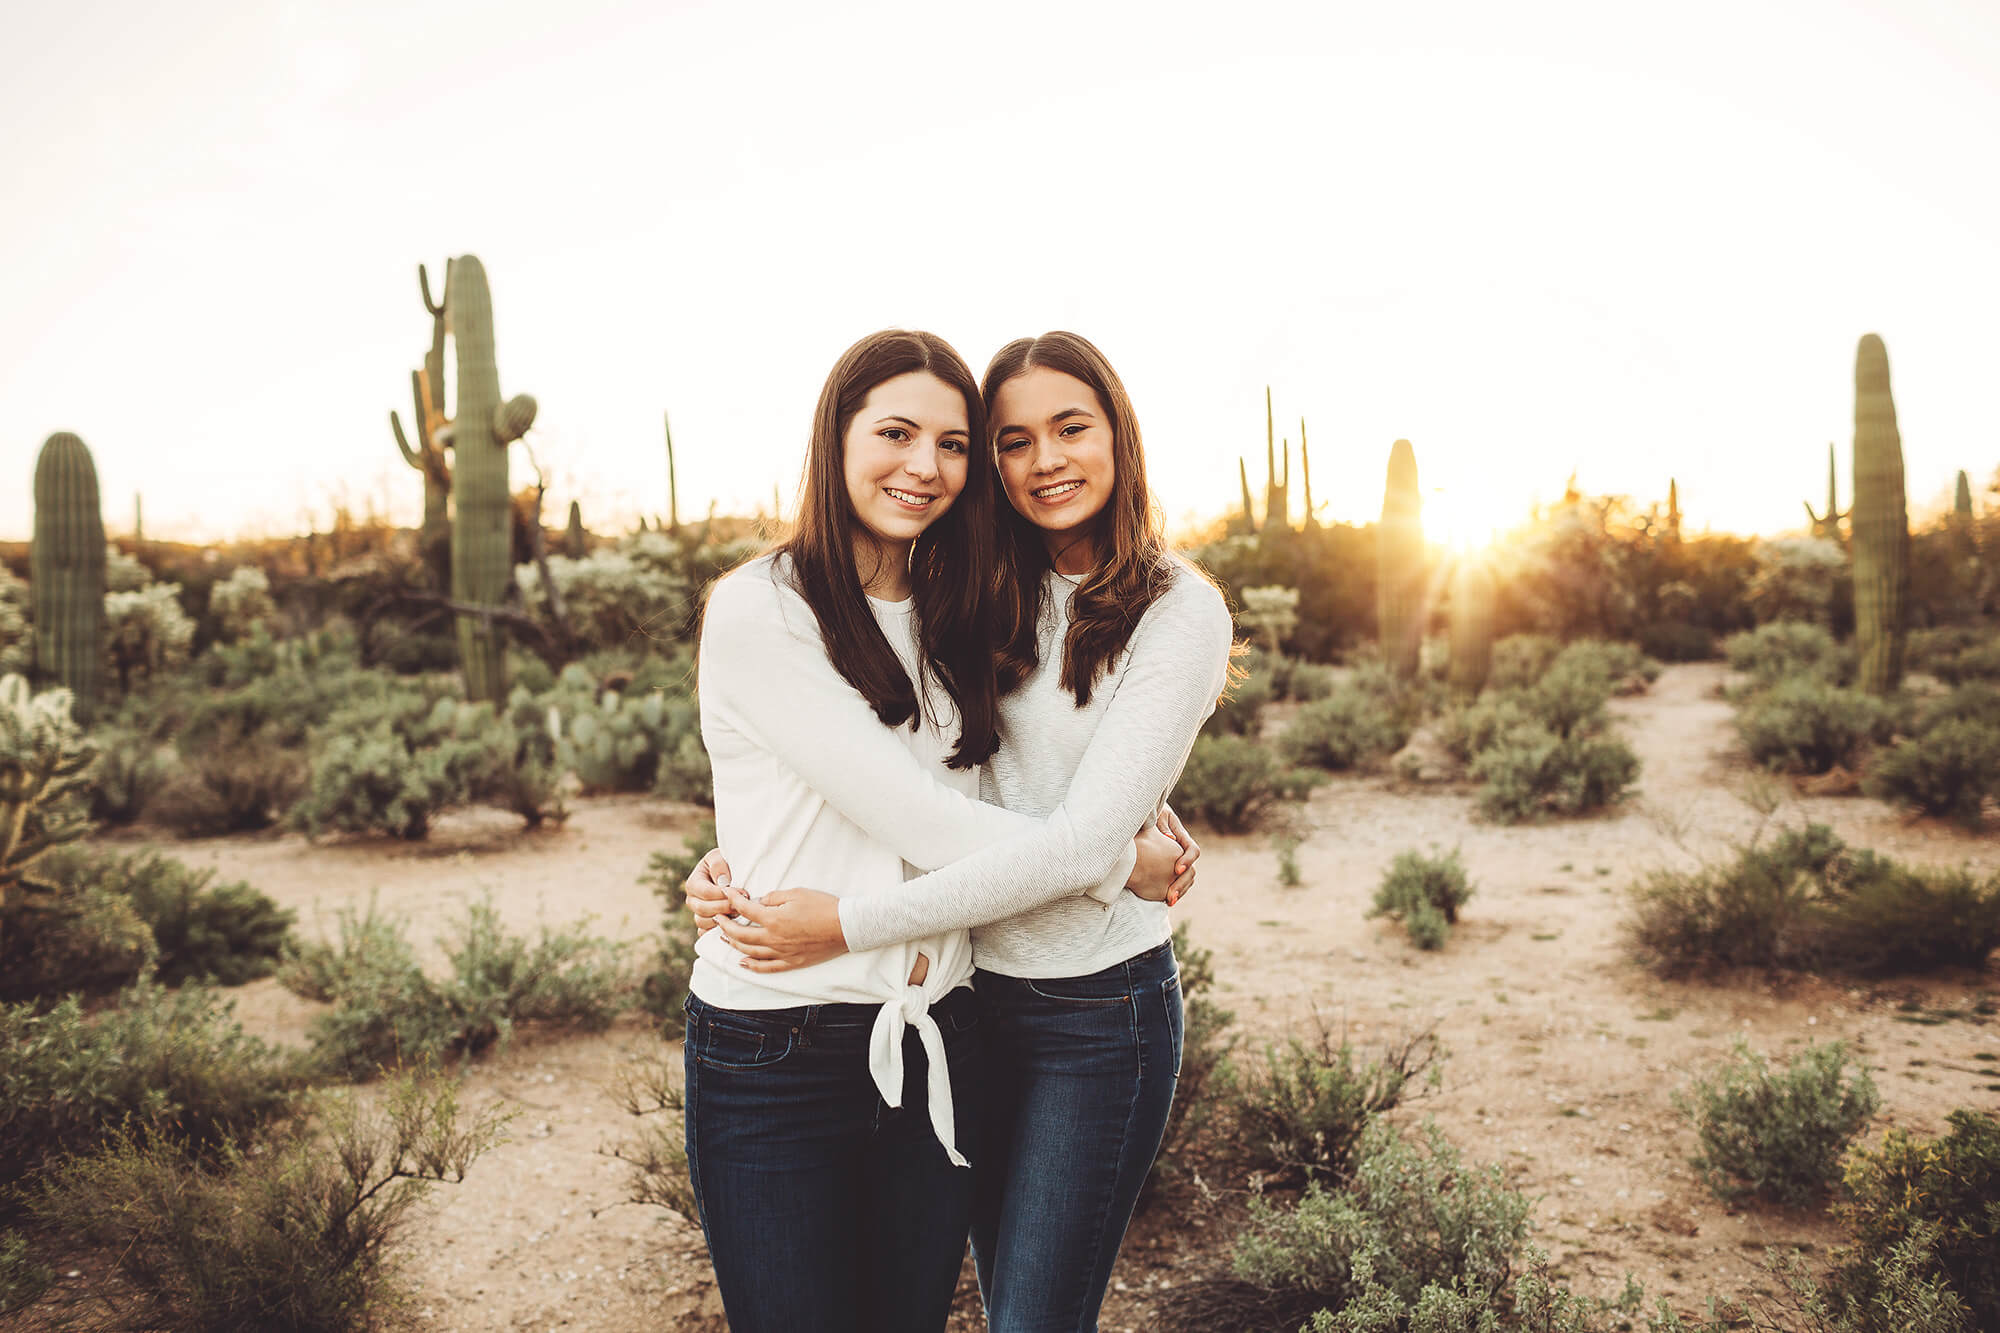 Sisterly hug during their family photo session with Belle Vie Photography at Sabino Canyon